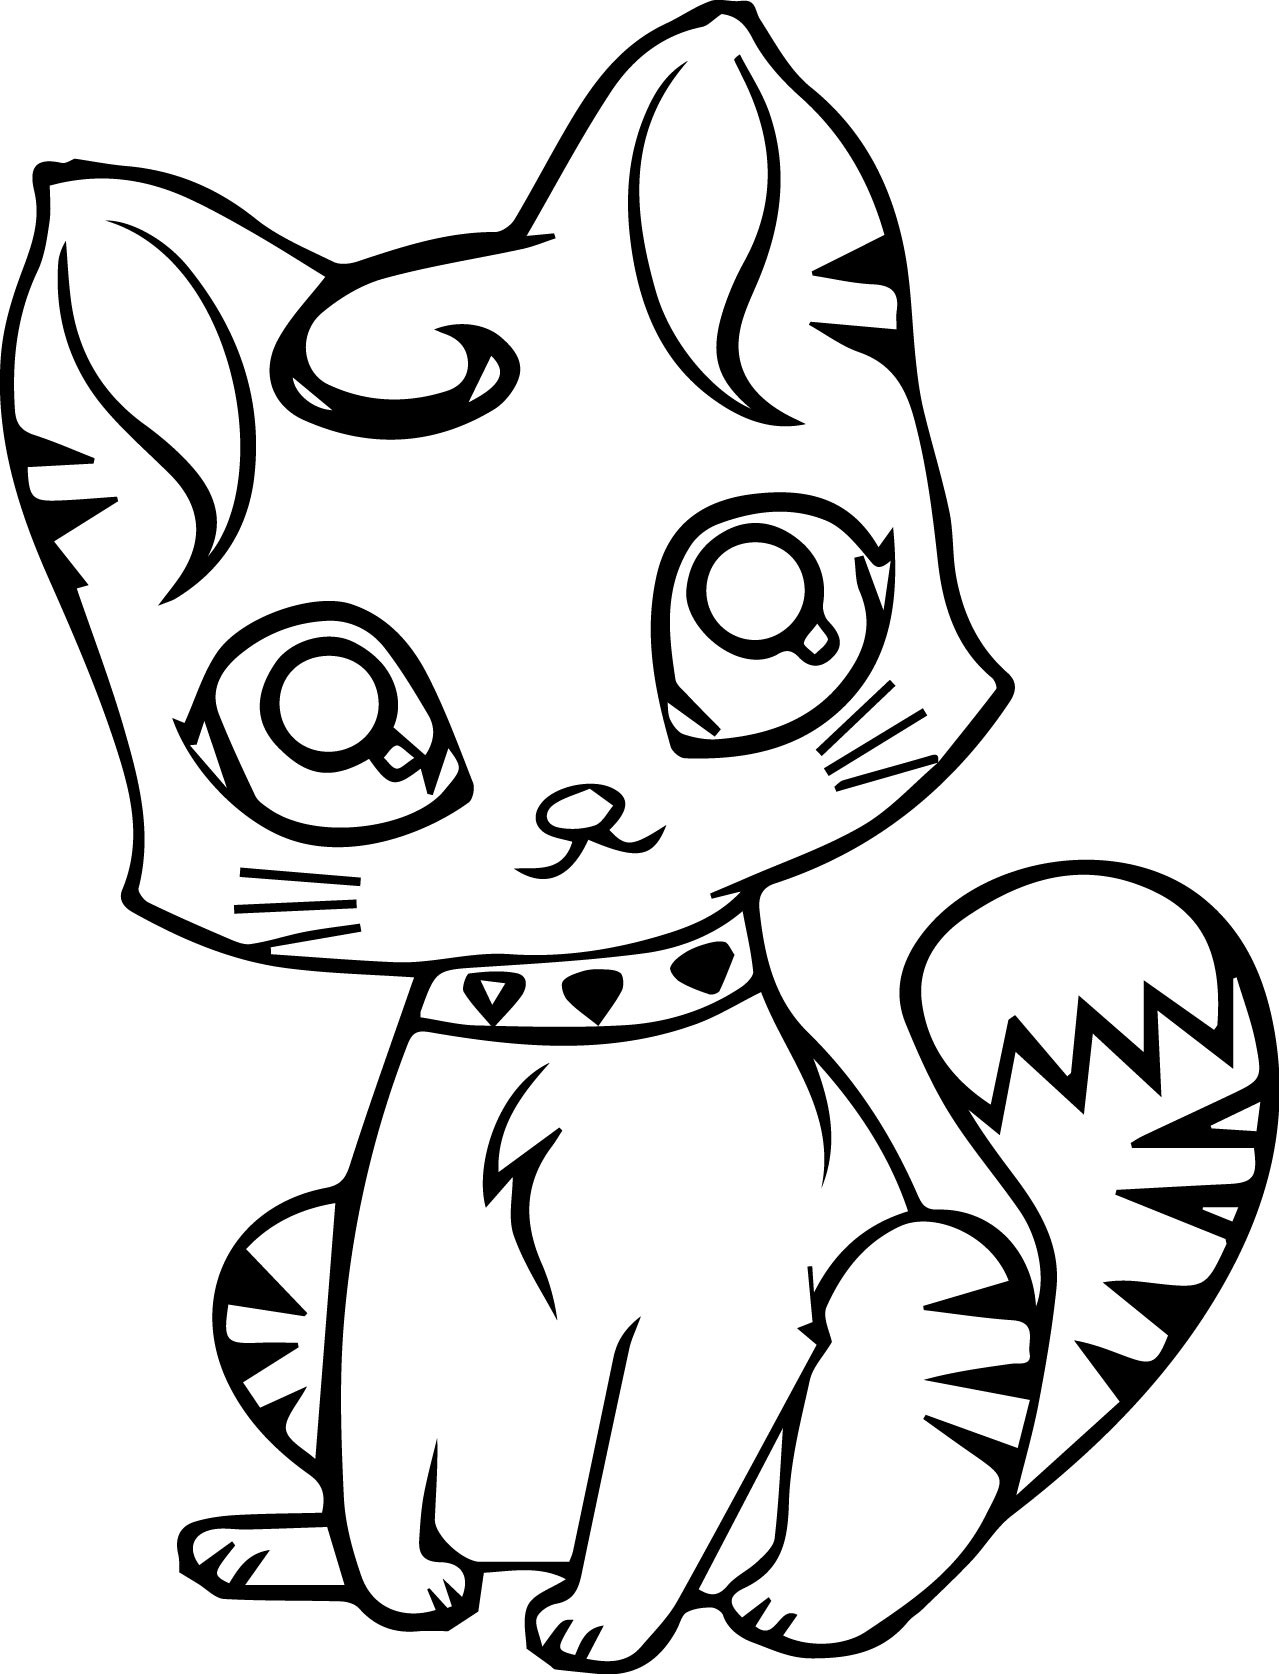 Cat Coloring Pages At GetColorings Free Printable Colorings Pages